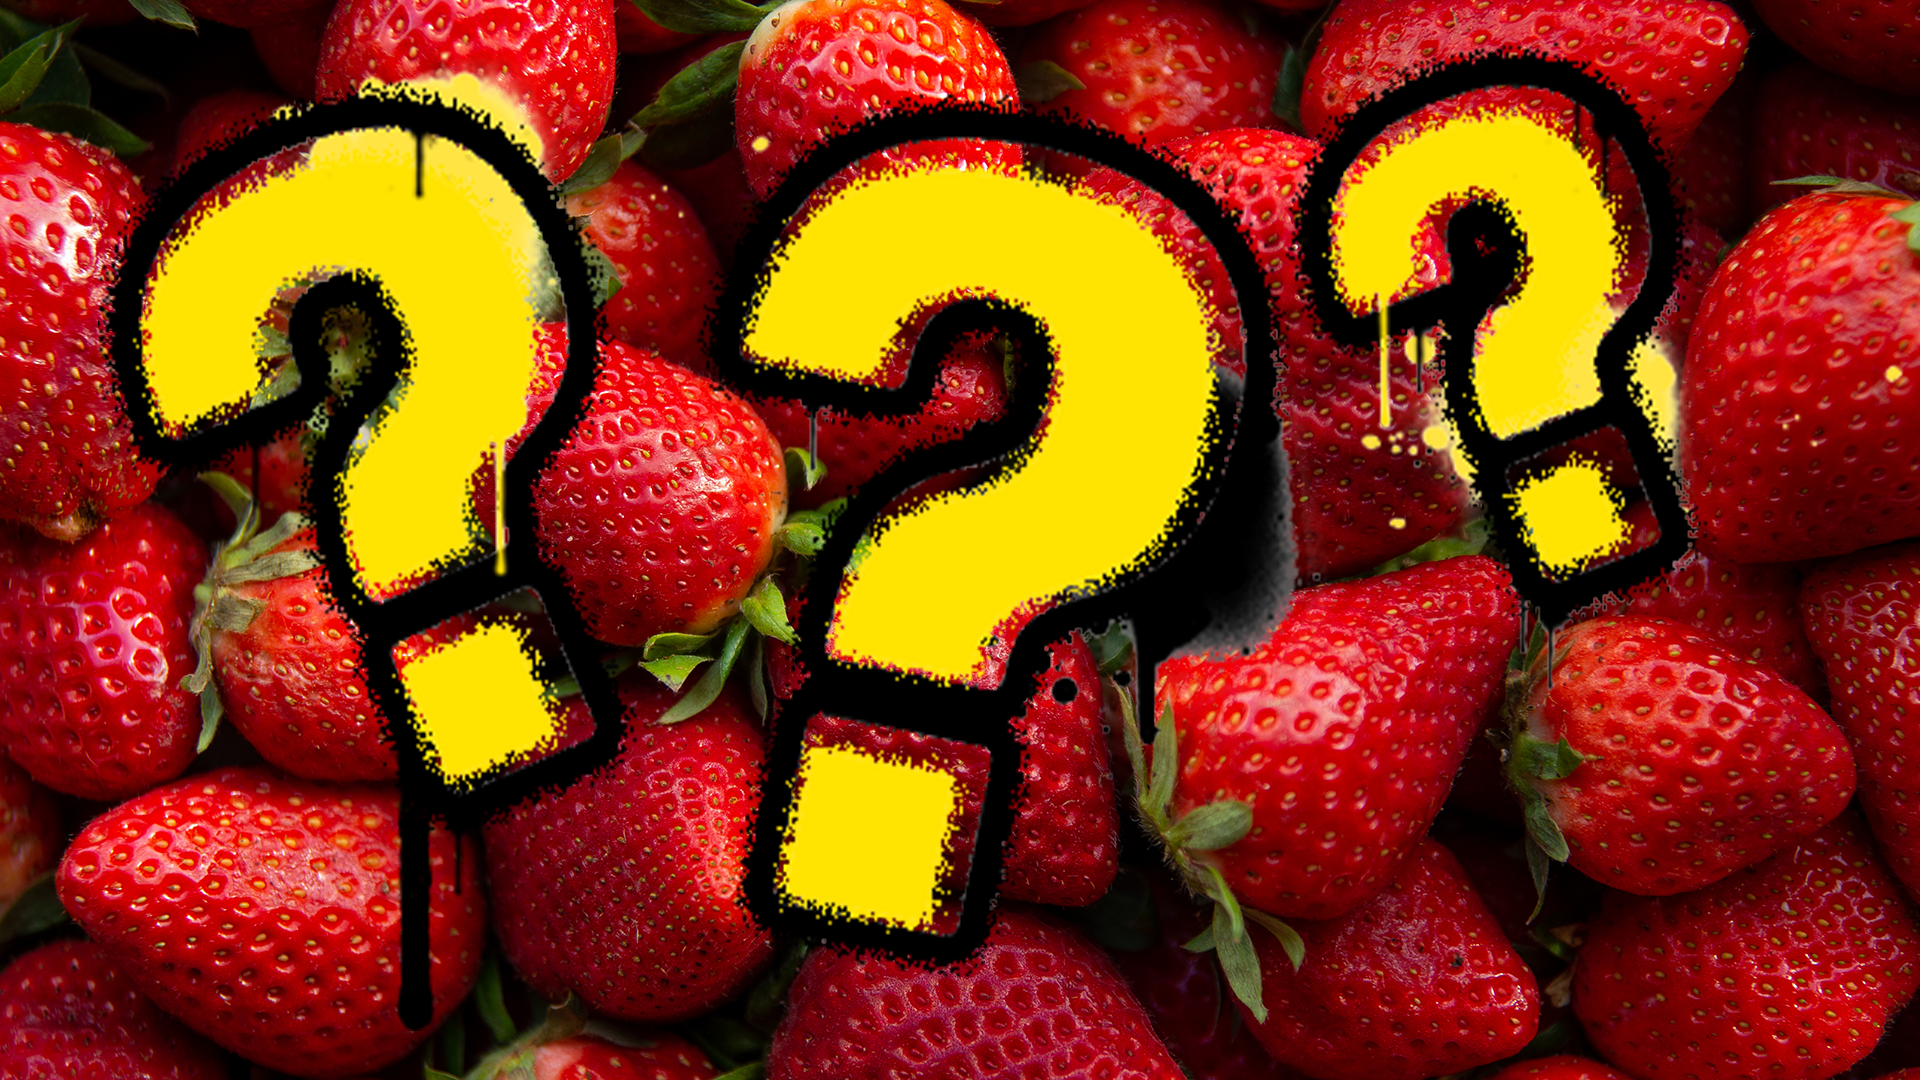 Strawberries and question marks